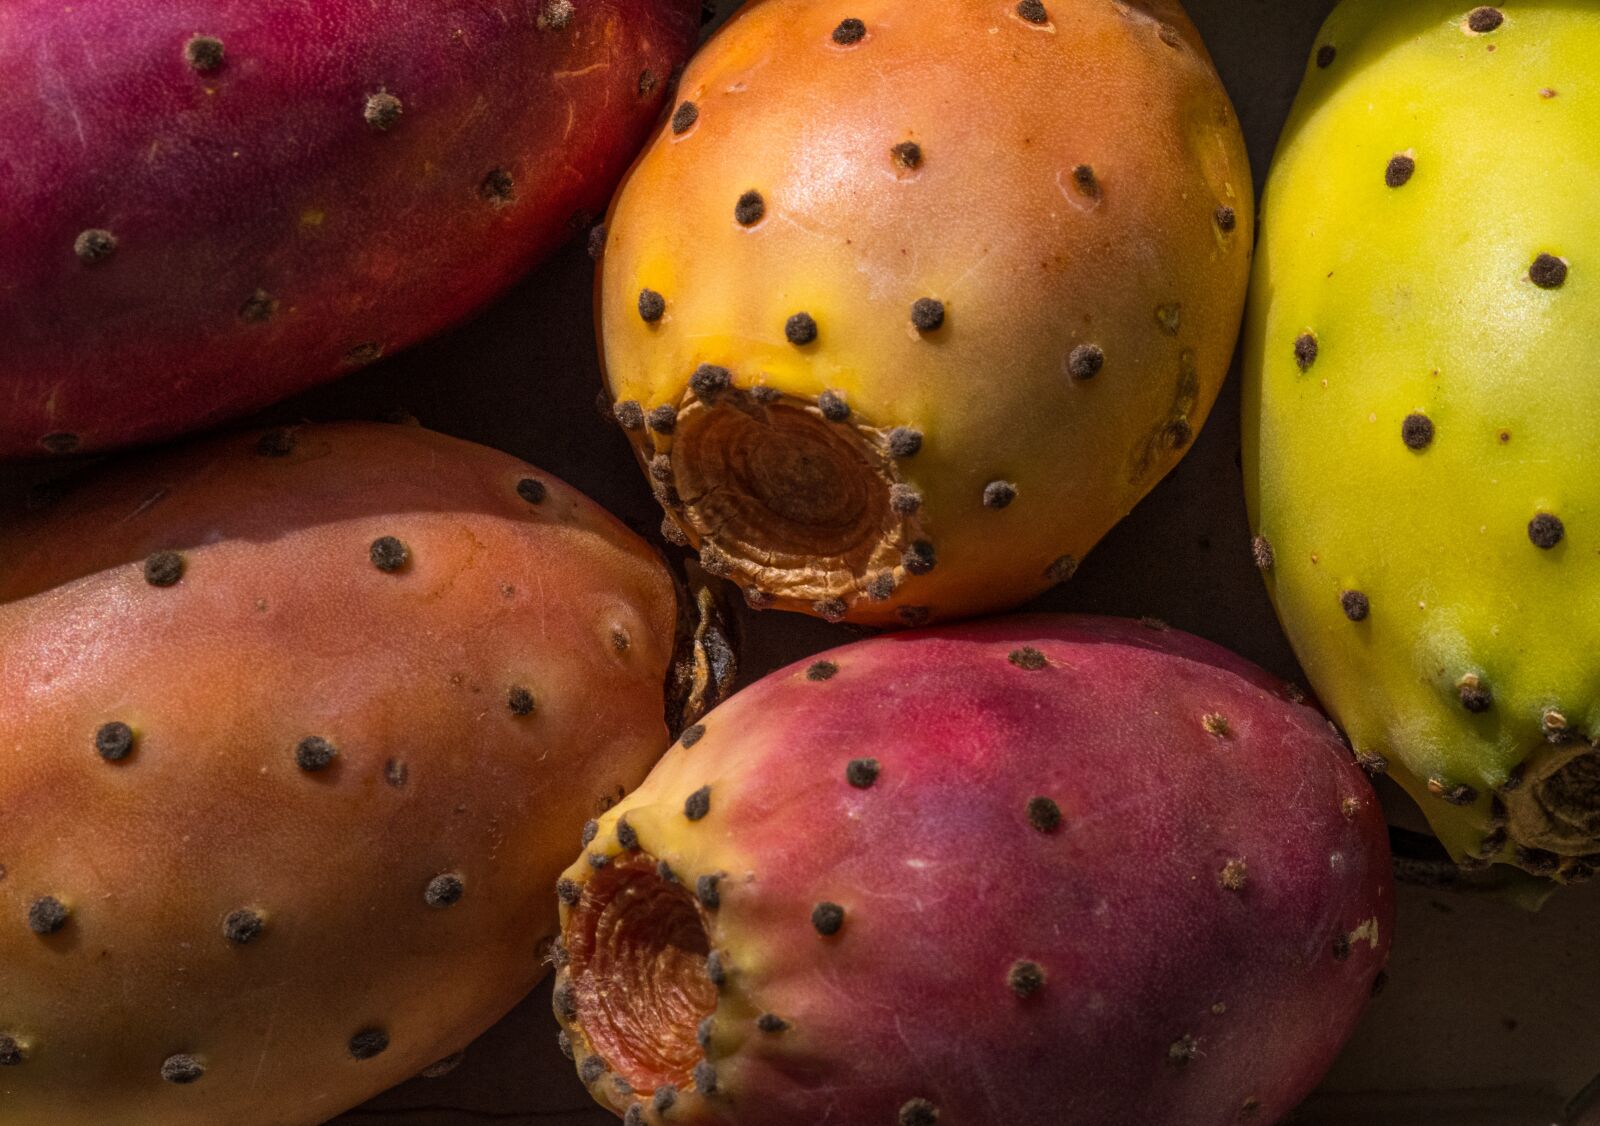 Sigma sample photo. Fruit, prickly pear, color photography